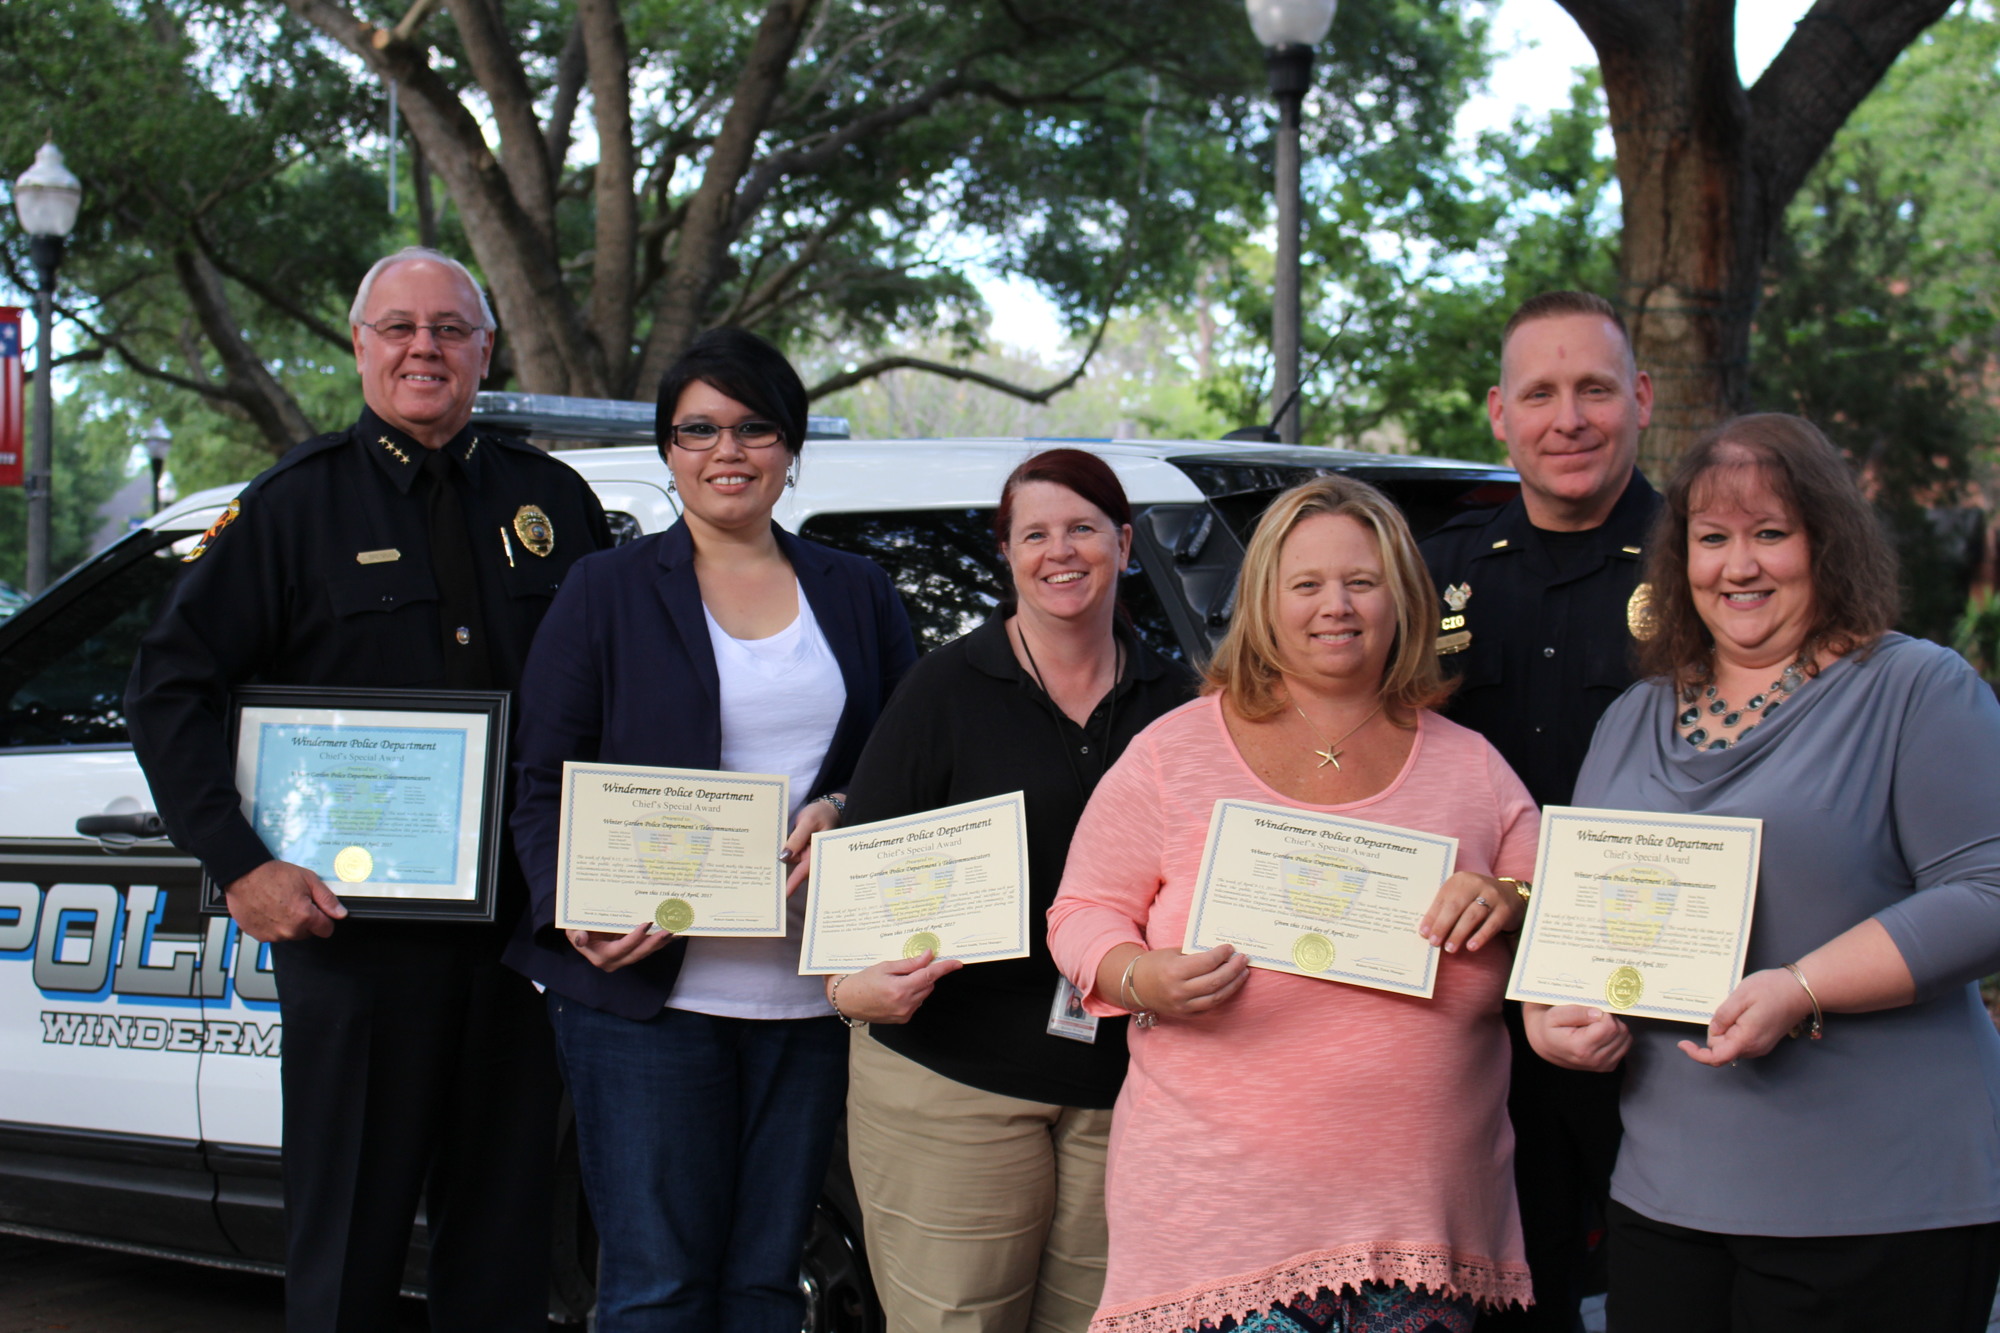 WG Police Chief George Brennan and WG Police Lt. Scott Allen with 911 dispatchers Melissa Oehler, Susan Burns, Julie Anderson and Melissa McCarthy, who received certificates of appreciation from the Town of Windermere.